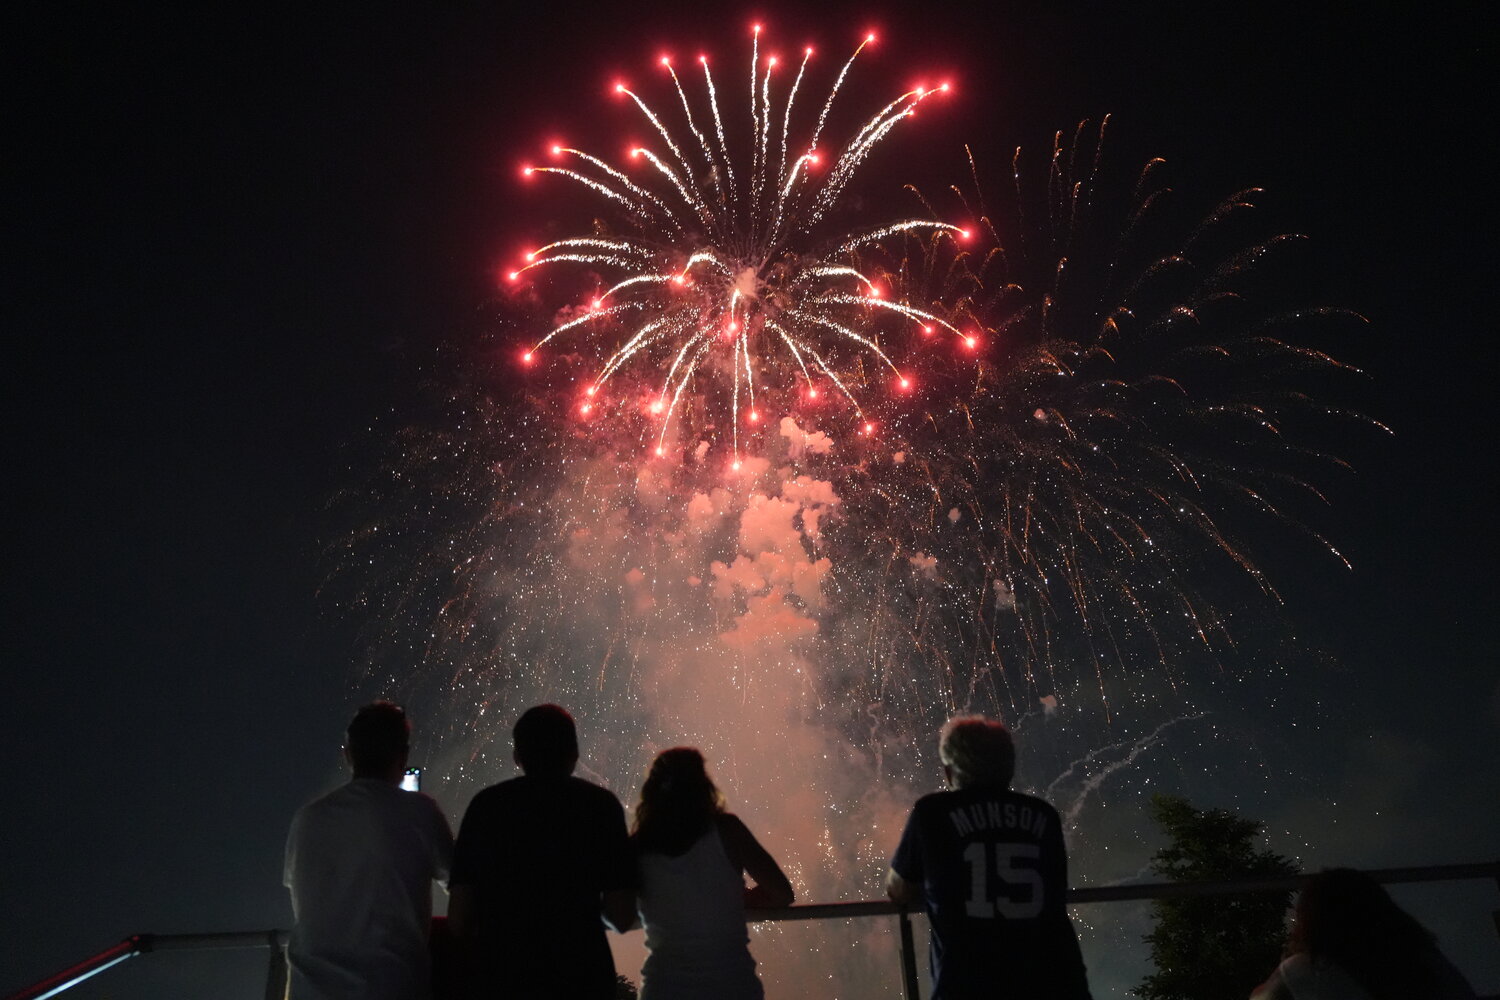 Hundred from all over Long Island gathered at the Pette and Barasch ball fields in Rockville Centre to see the annual fireworks celebration on July 8.